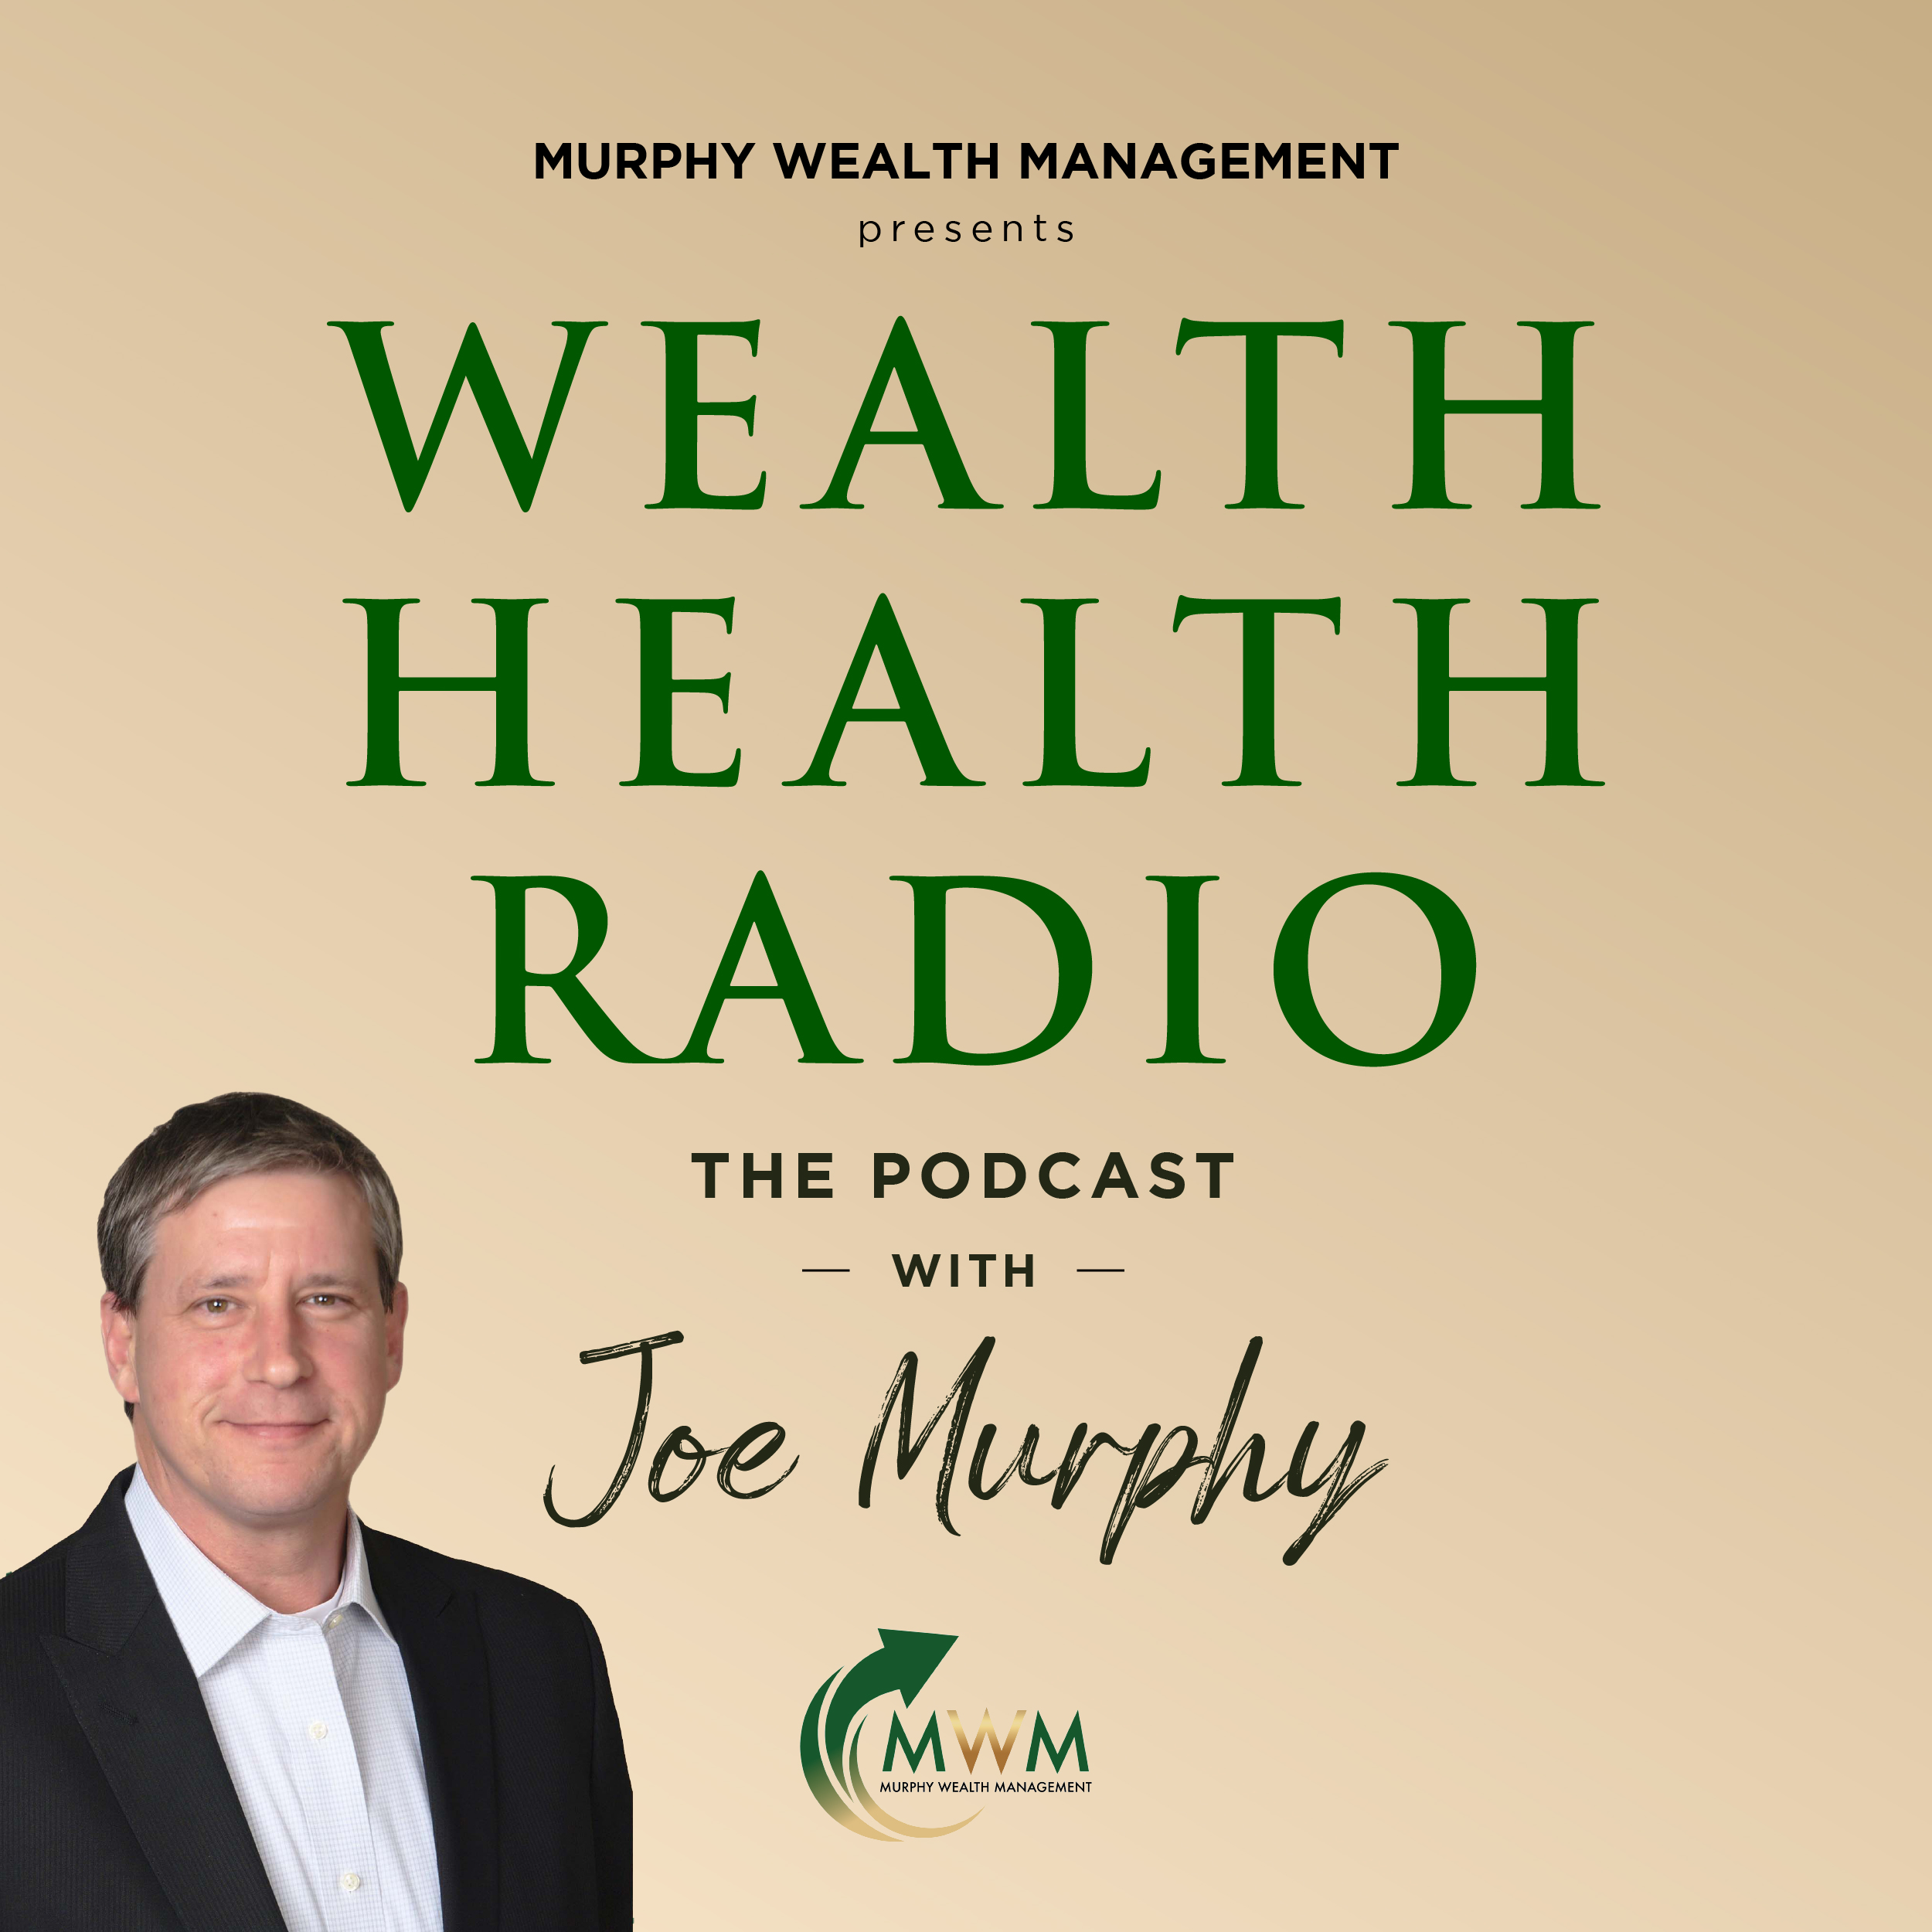 Wealth Health Radio  Joe has some year end tips to help make sure your retirement plan is ready for 2023.